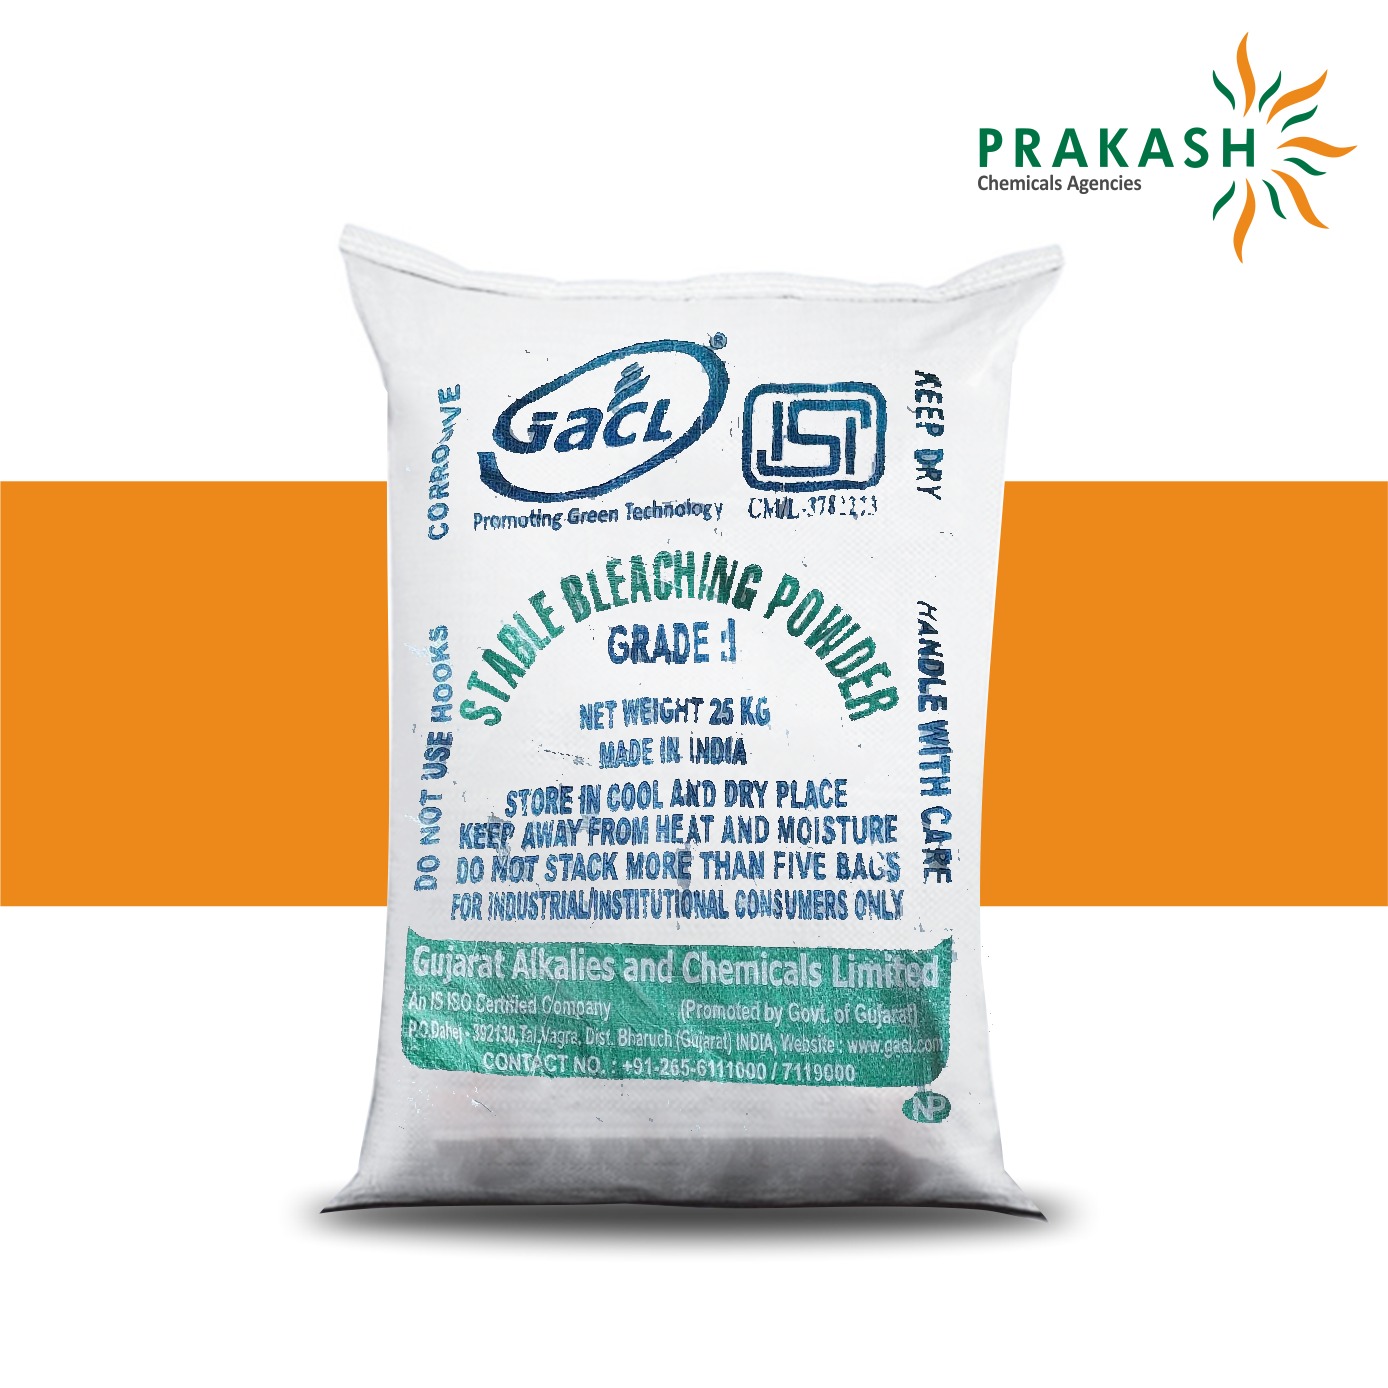 Prakash chemicals agencies Gujarat Bleaching Powder, CaOCL2, 25 Kg. LDPE lined HDPE bags, brand offered - GACL